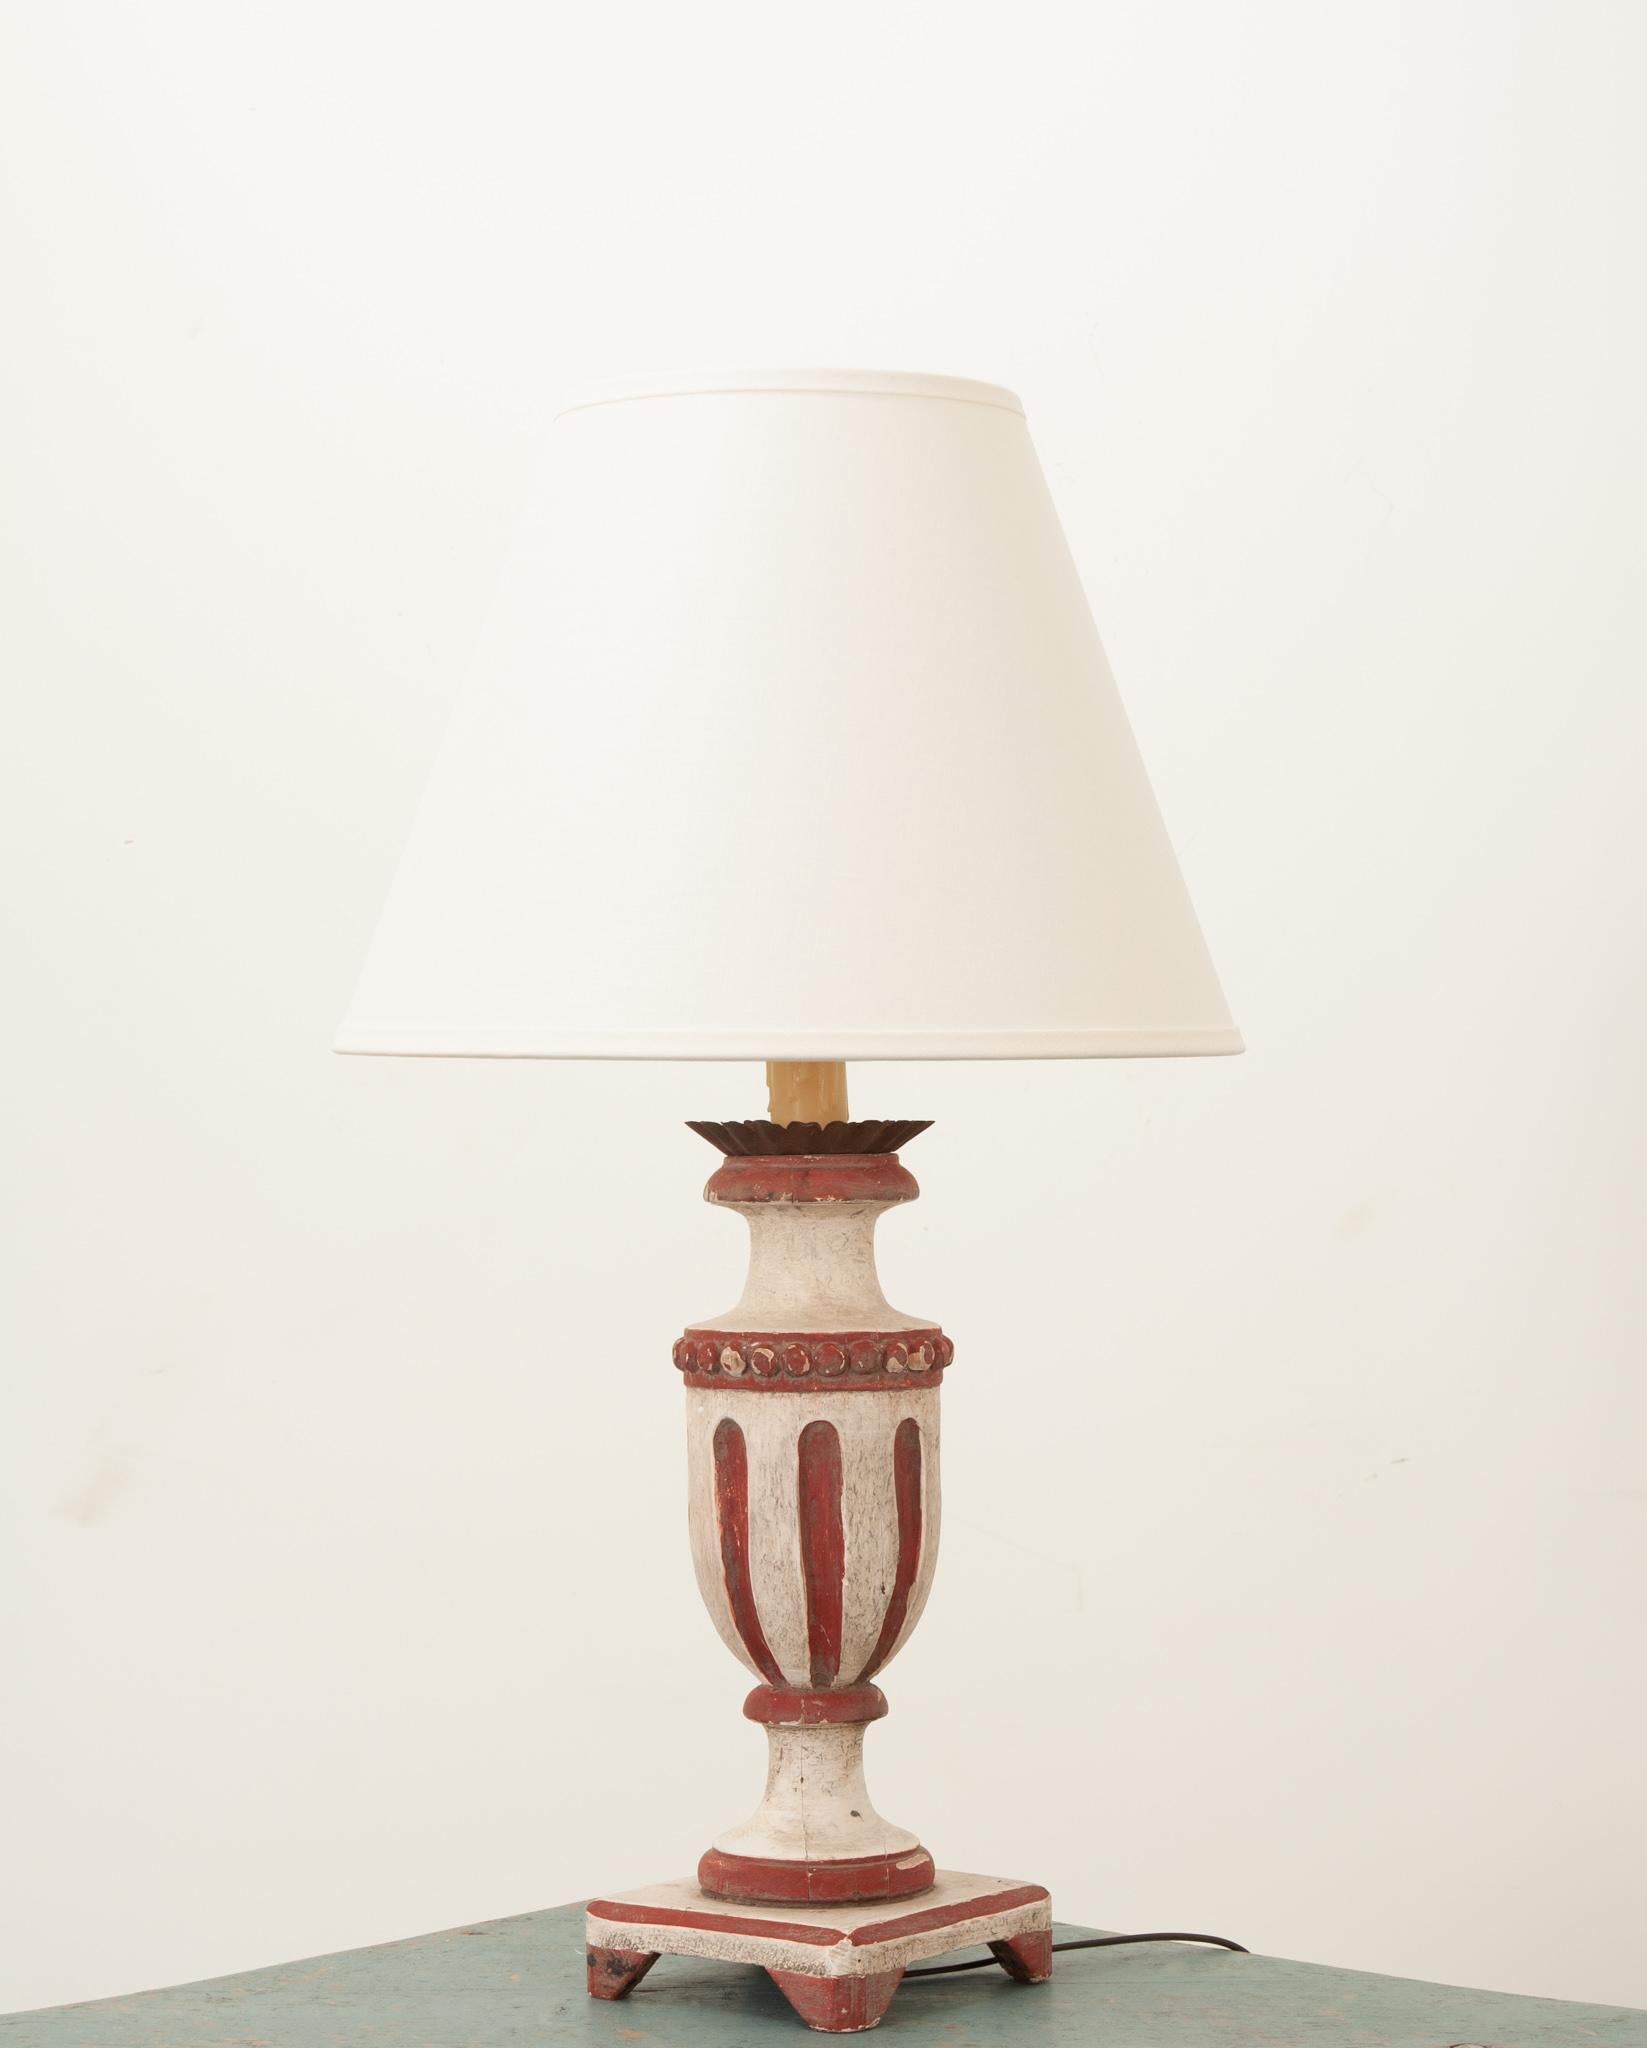 A neat vintage lamp from France with wonderful handcrafted elements. Carved and painted with white and crimson paint and a brass crown accent. Fixed with a new linen shade and recently rewired for the US using UL listed parts. Raised on a square